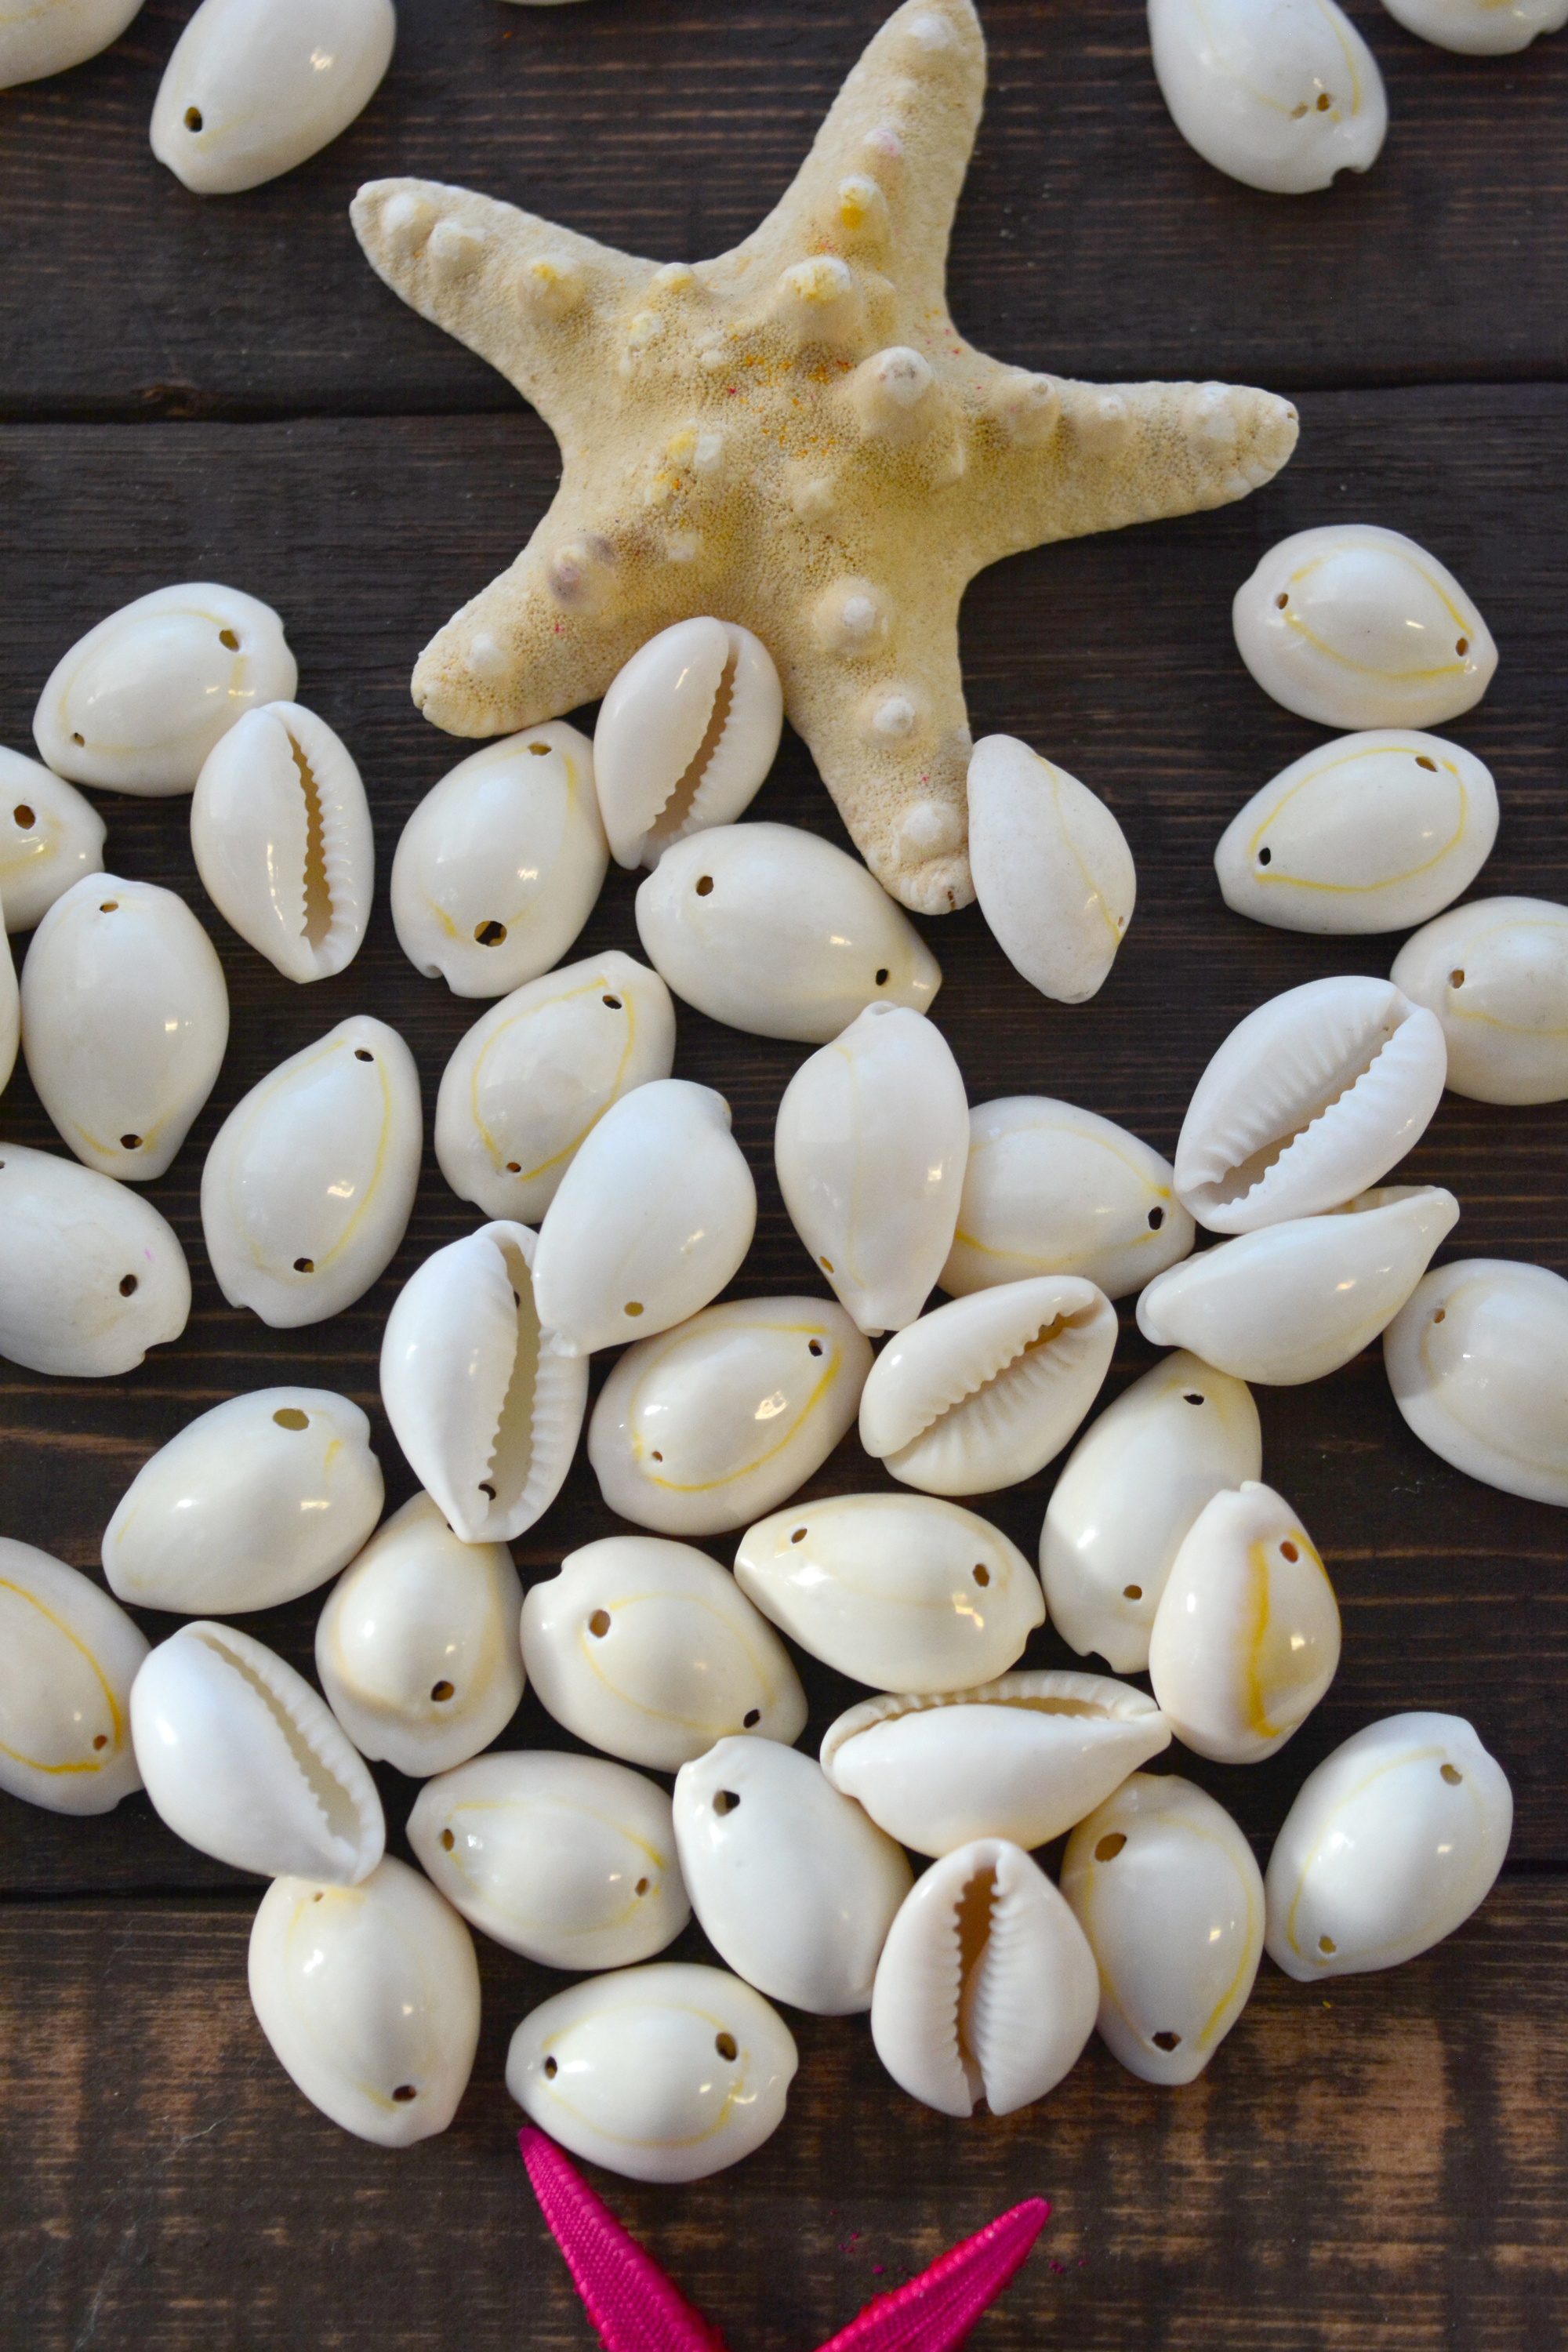 Cowrie shell photos found on the web.